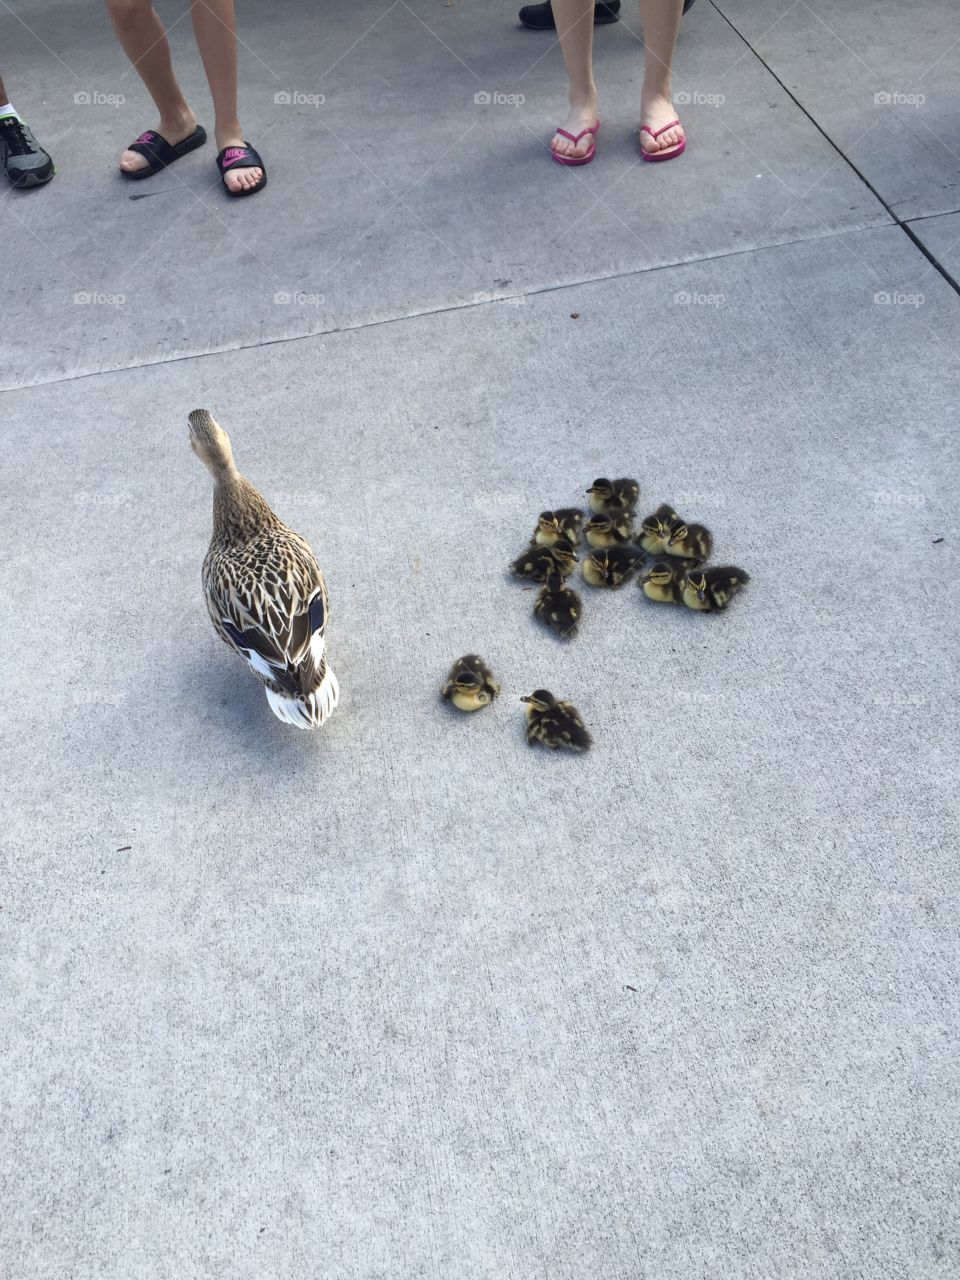 Duck with ducklings. Duck with ducklings